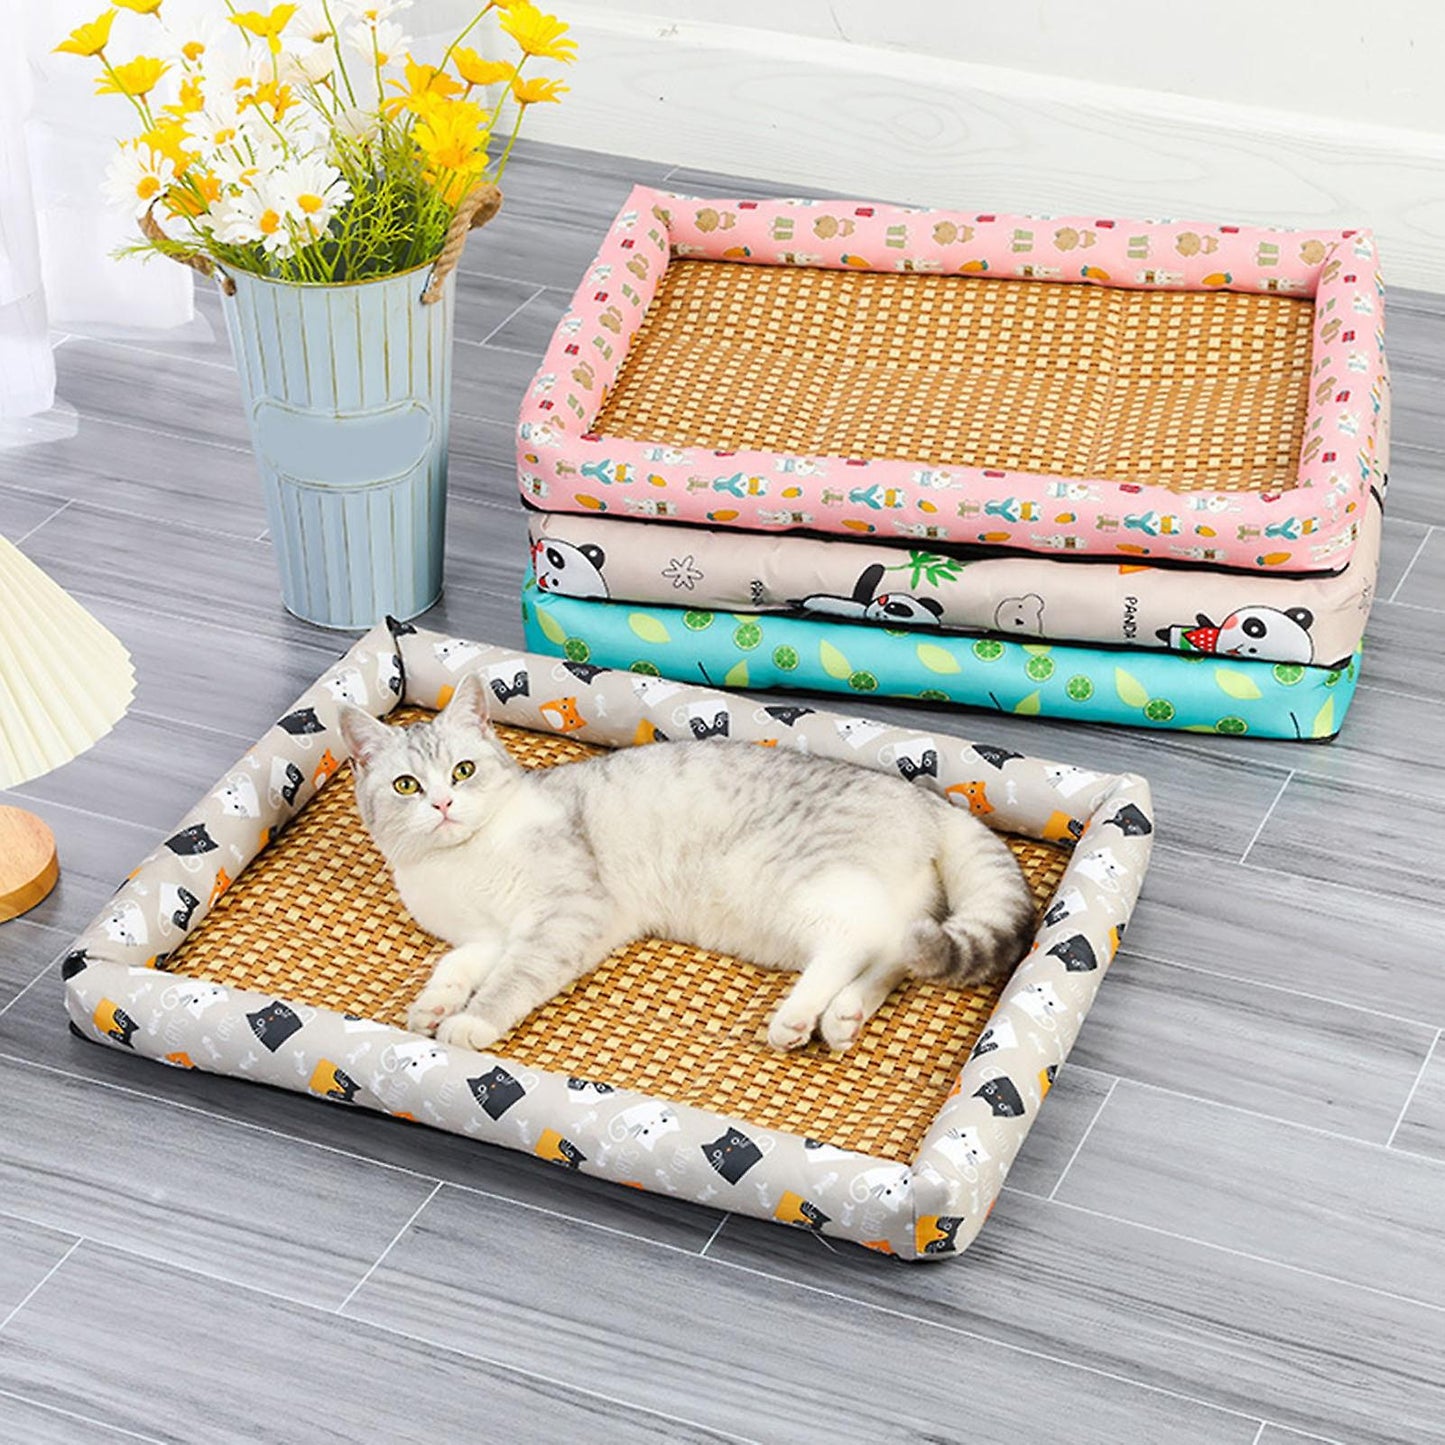 "Happy Dog Cooling Bed - Ice Mat Technology, Ergonomic Design, Odor-Resistant Fabric, Cartoon Print - Perfect for Dogs, Machine Washable, Durable Material"